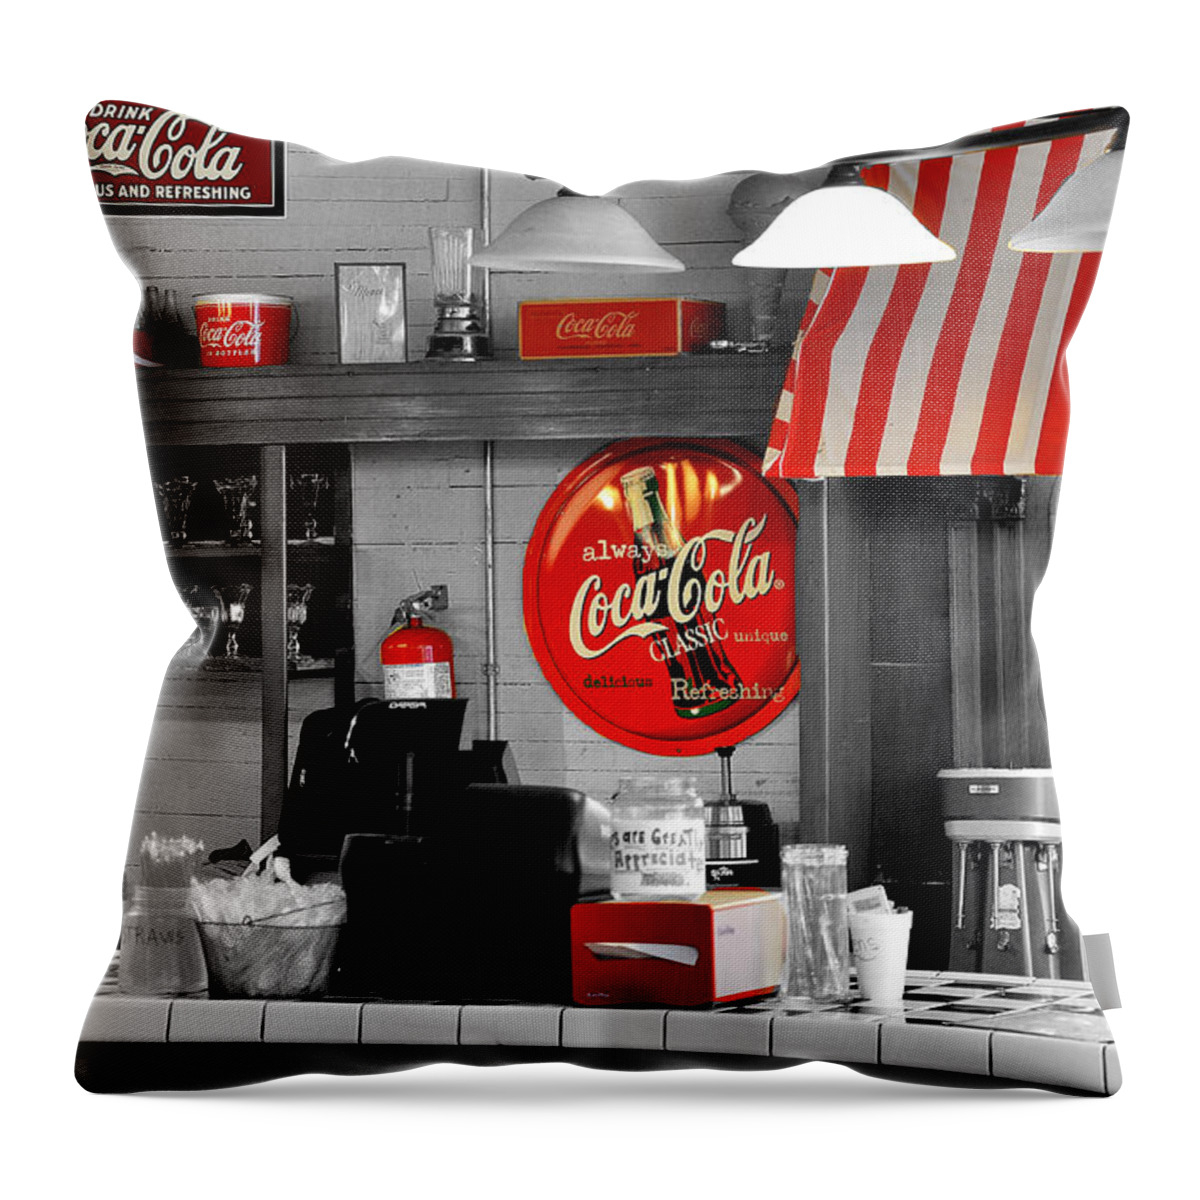 Coca Cola Throw Pillow featuring the photograph Coca Cola #2 by Todd Hostetter